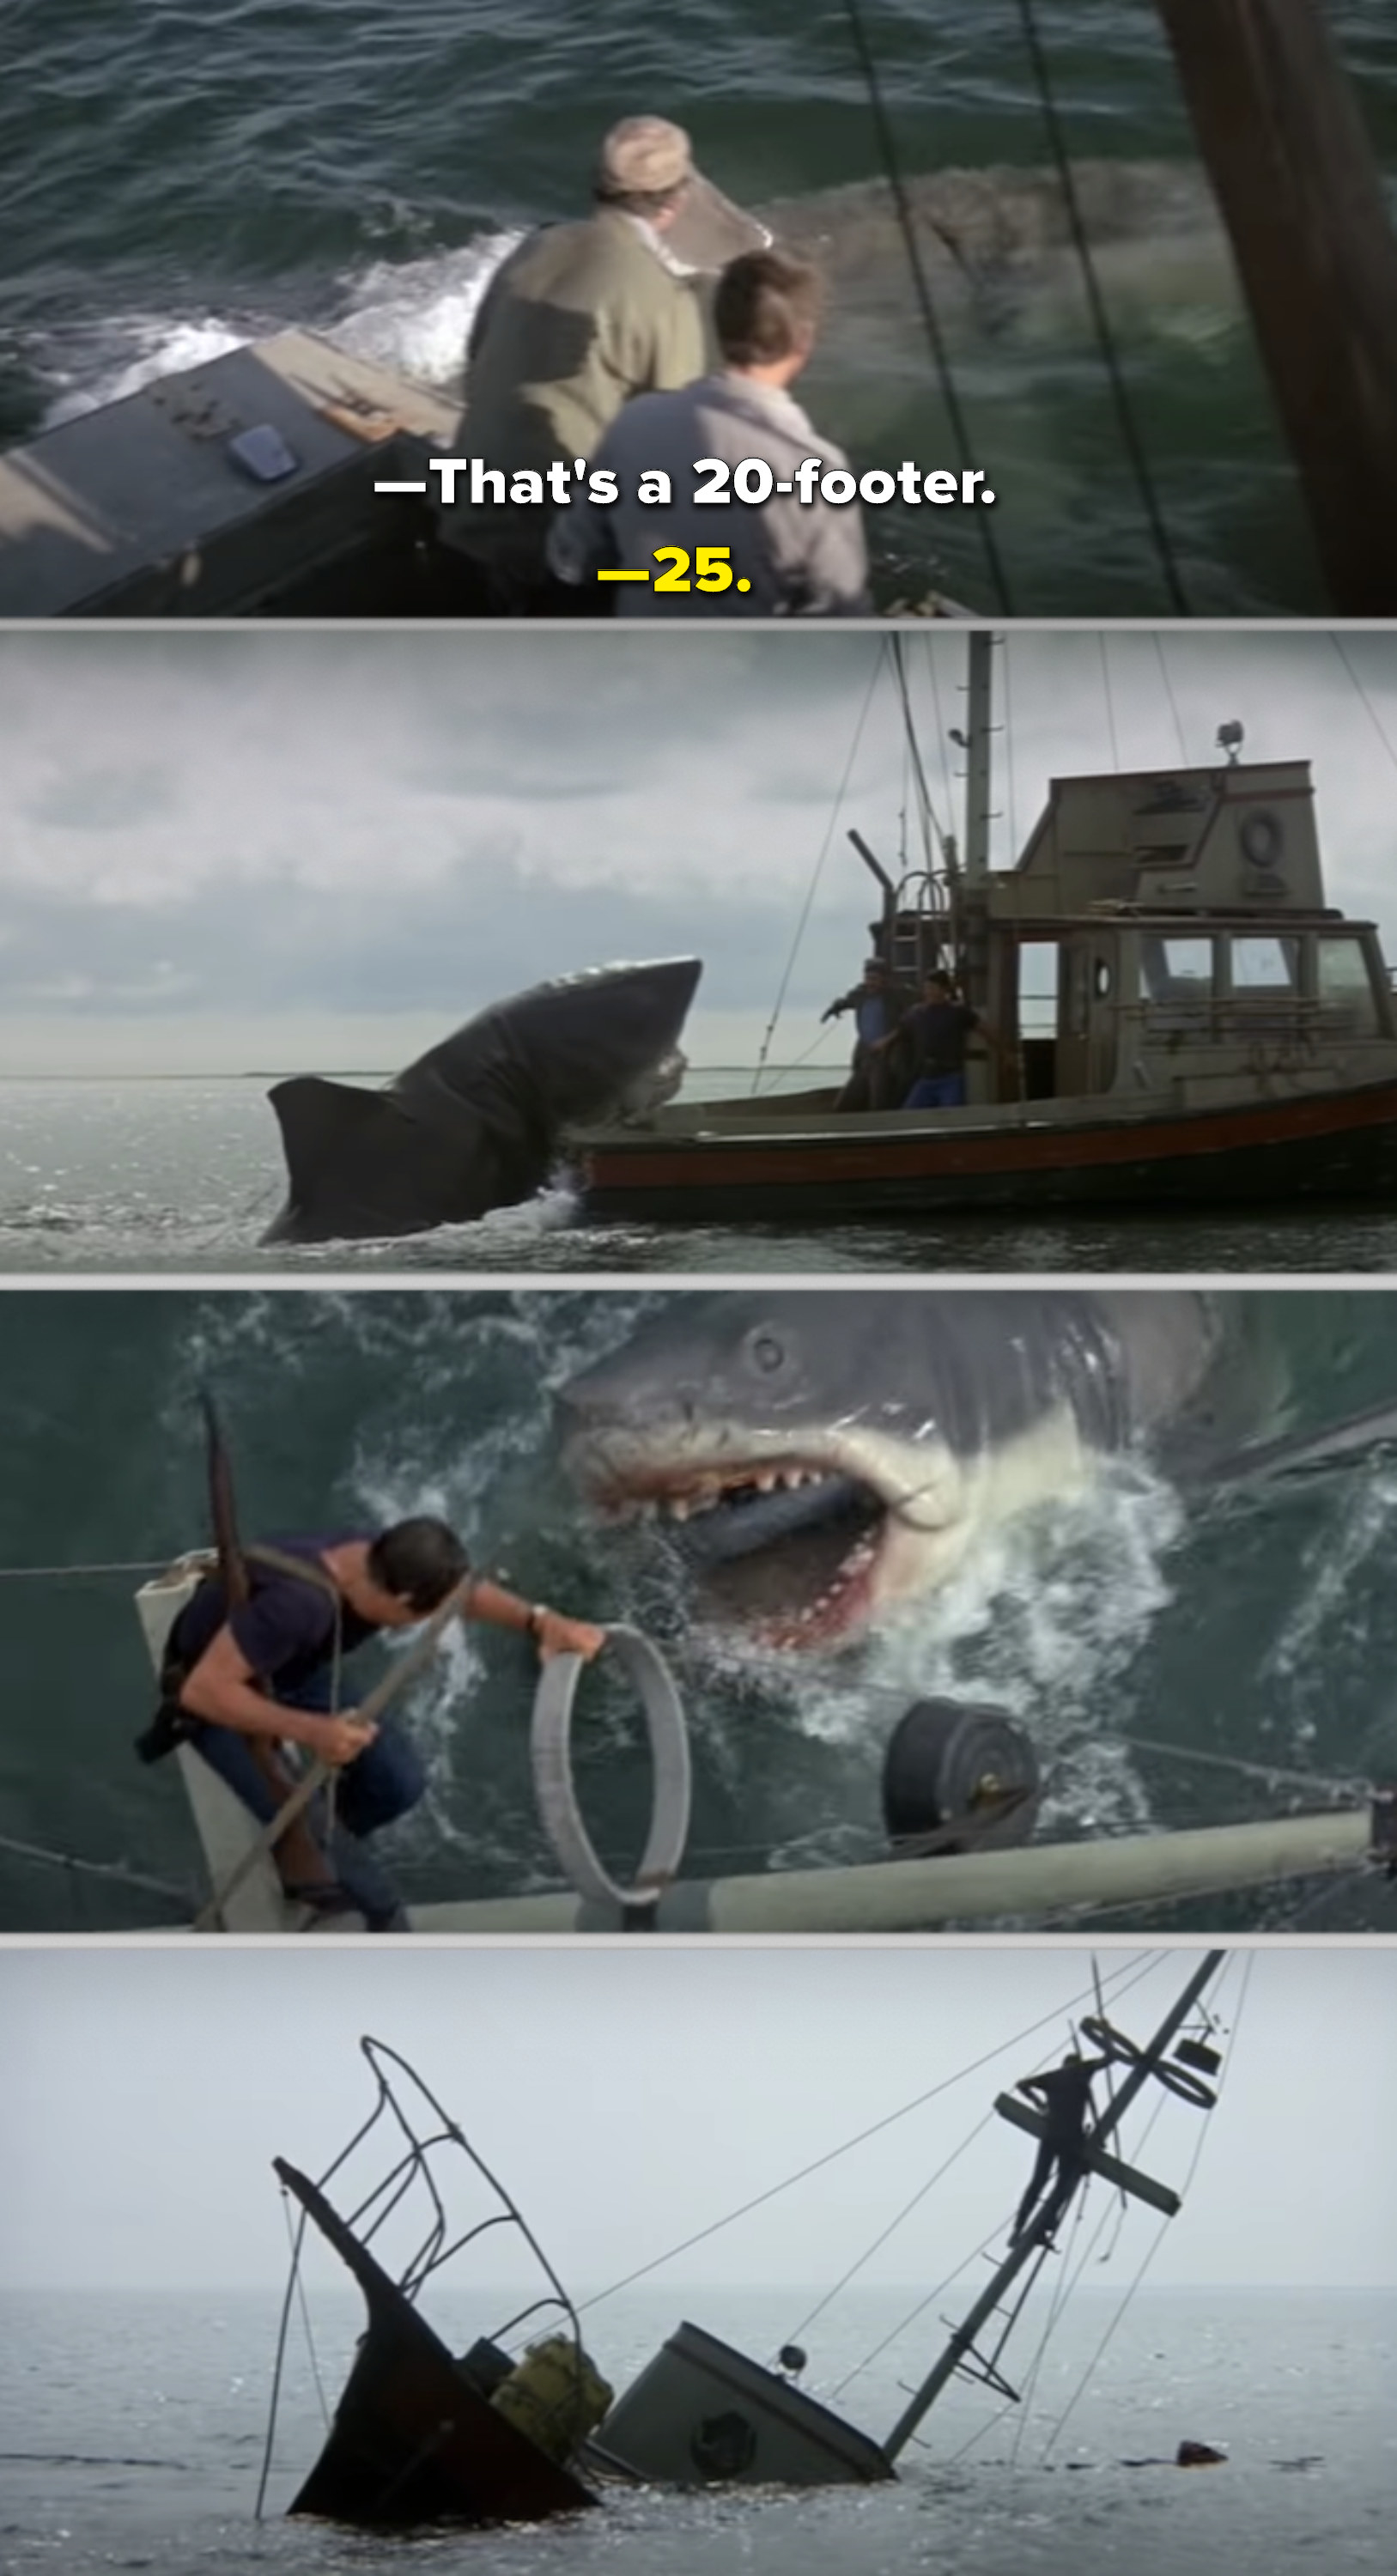 The shark destroying the boat